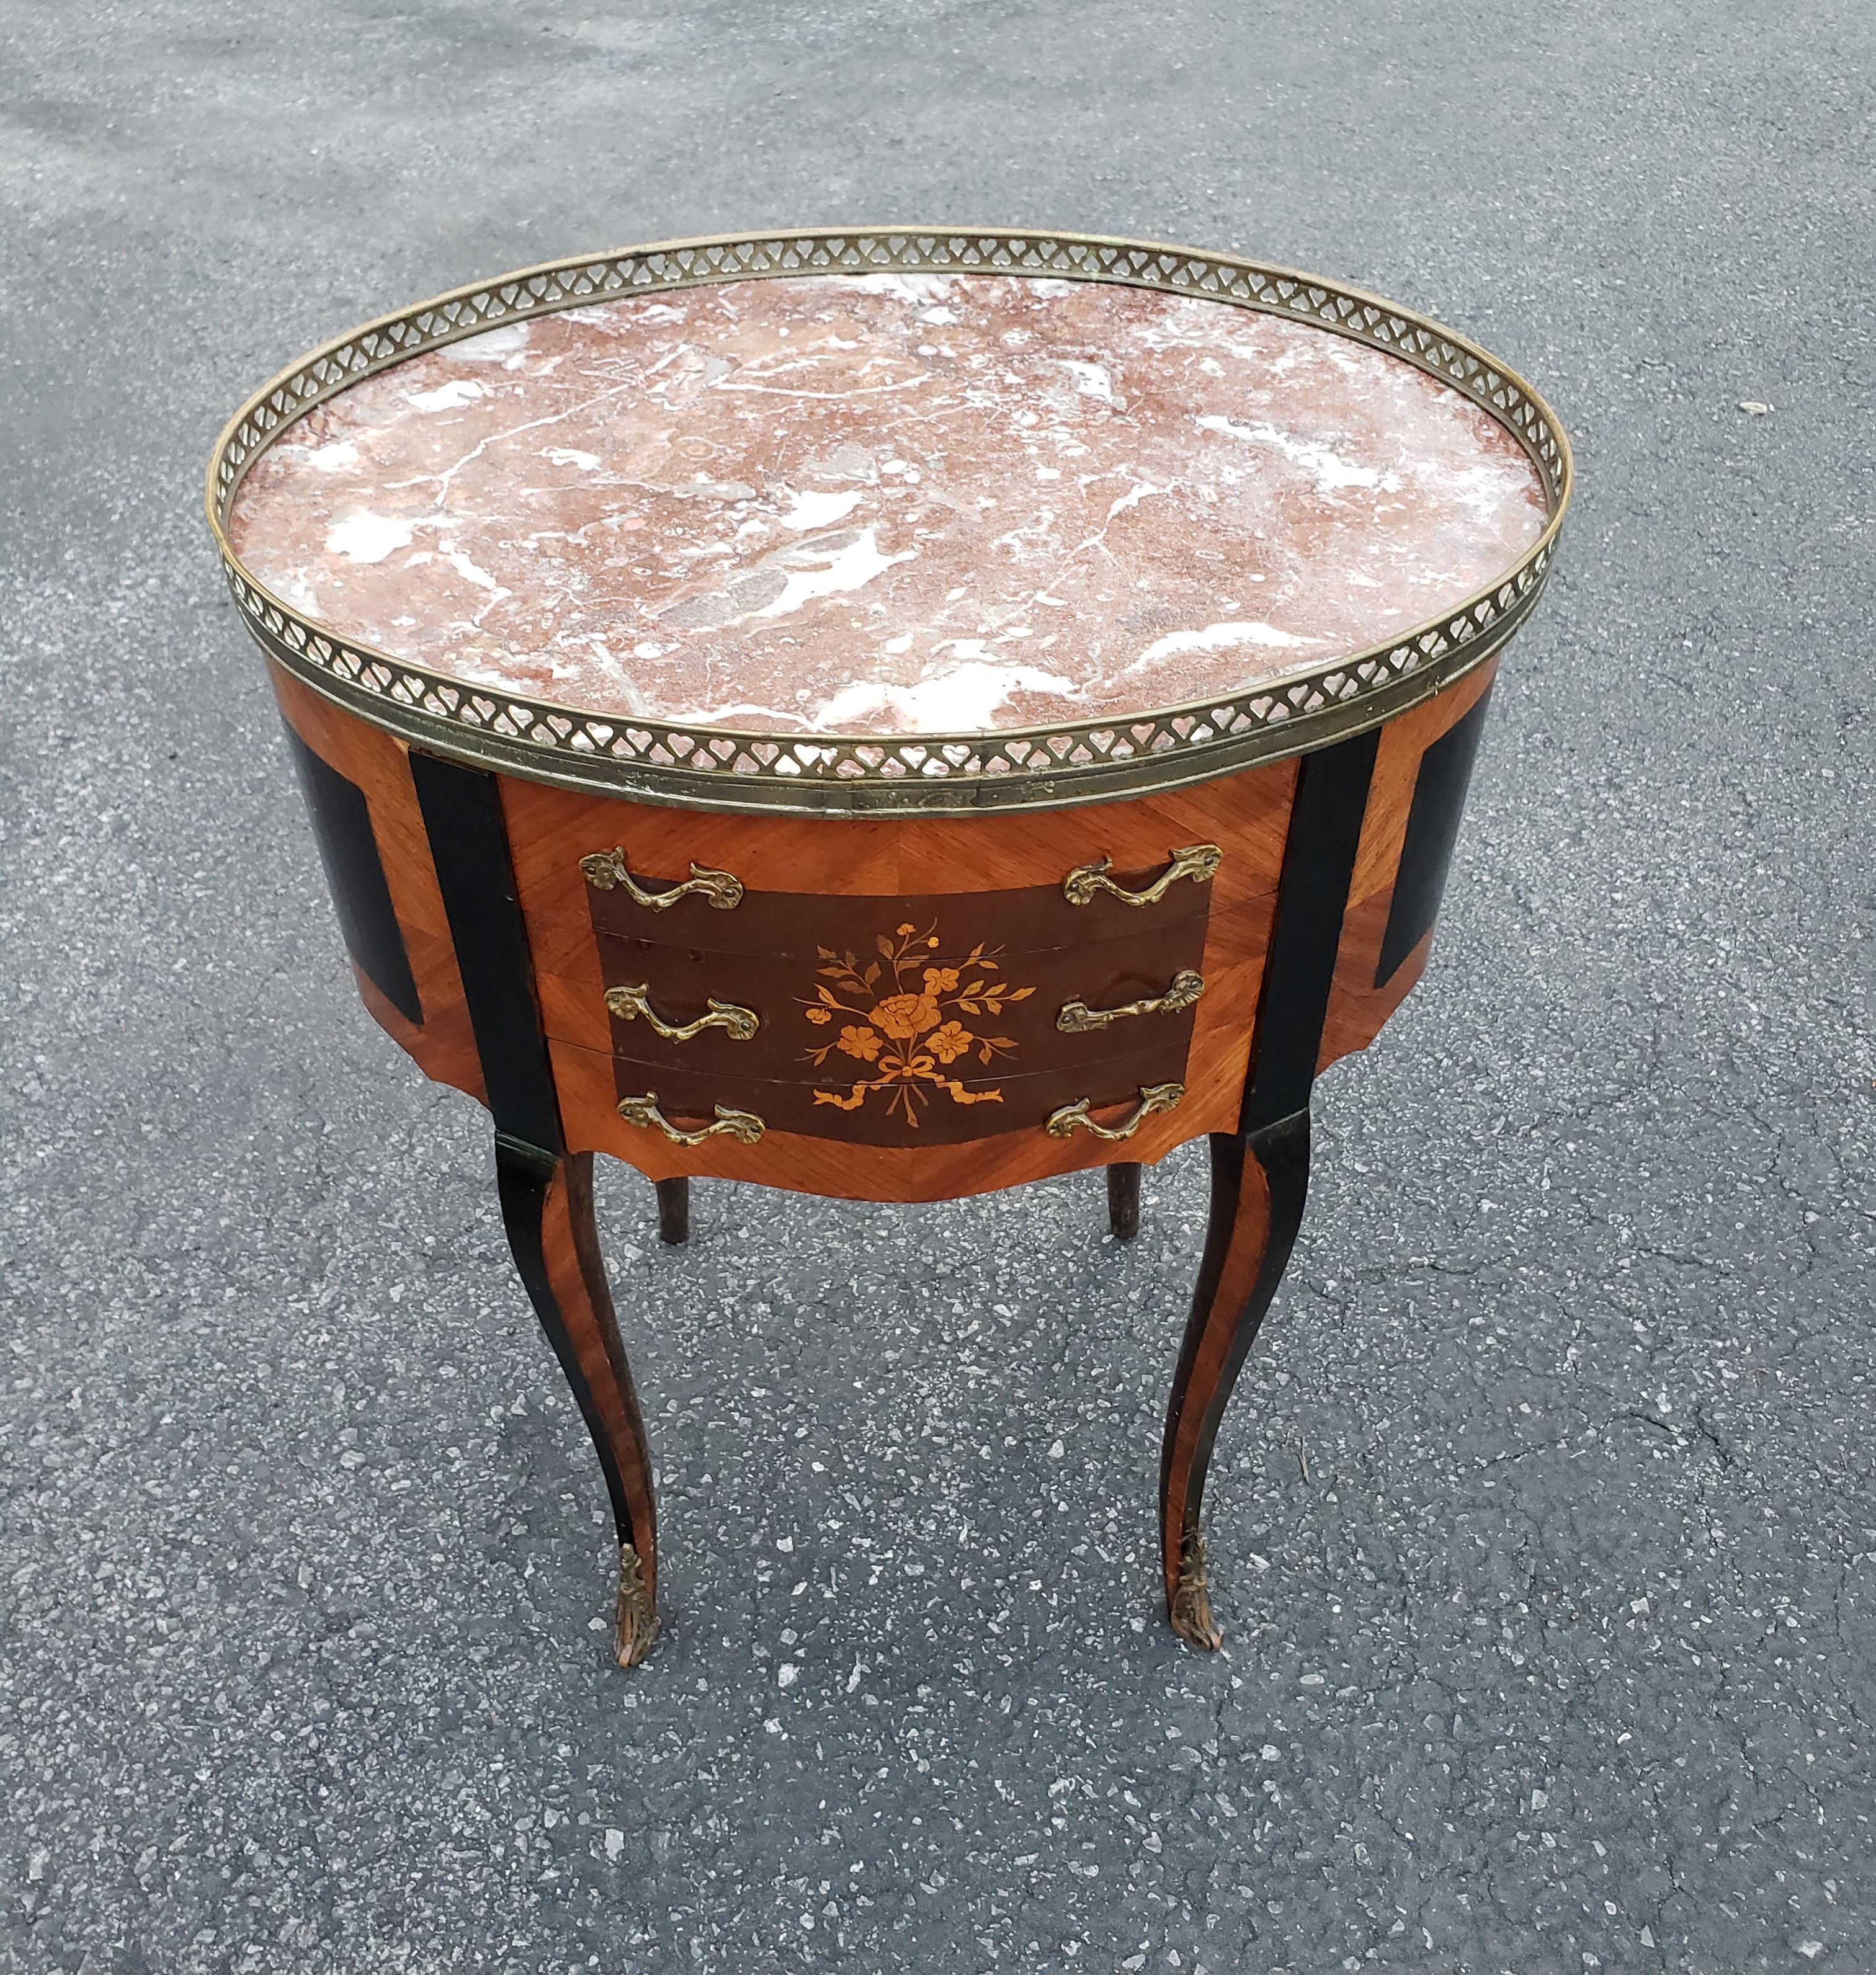 A  Louis XV style Ebonized Satinwood Inlaid Mahogany And Marble Inset Side Table with three nicely functional drawers. Measures 20